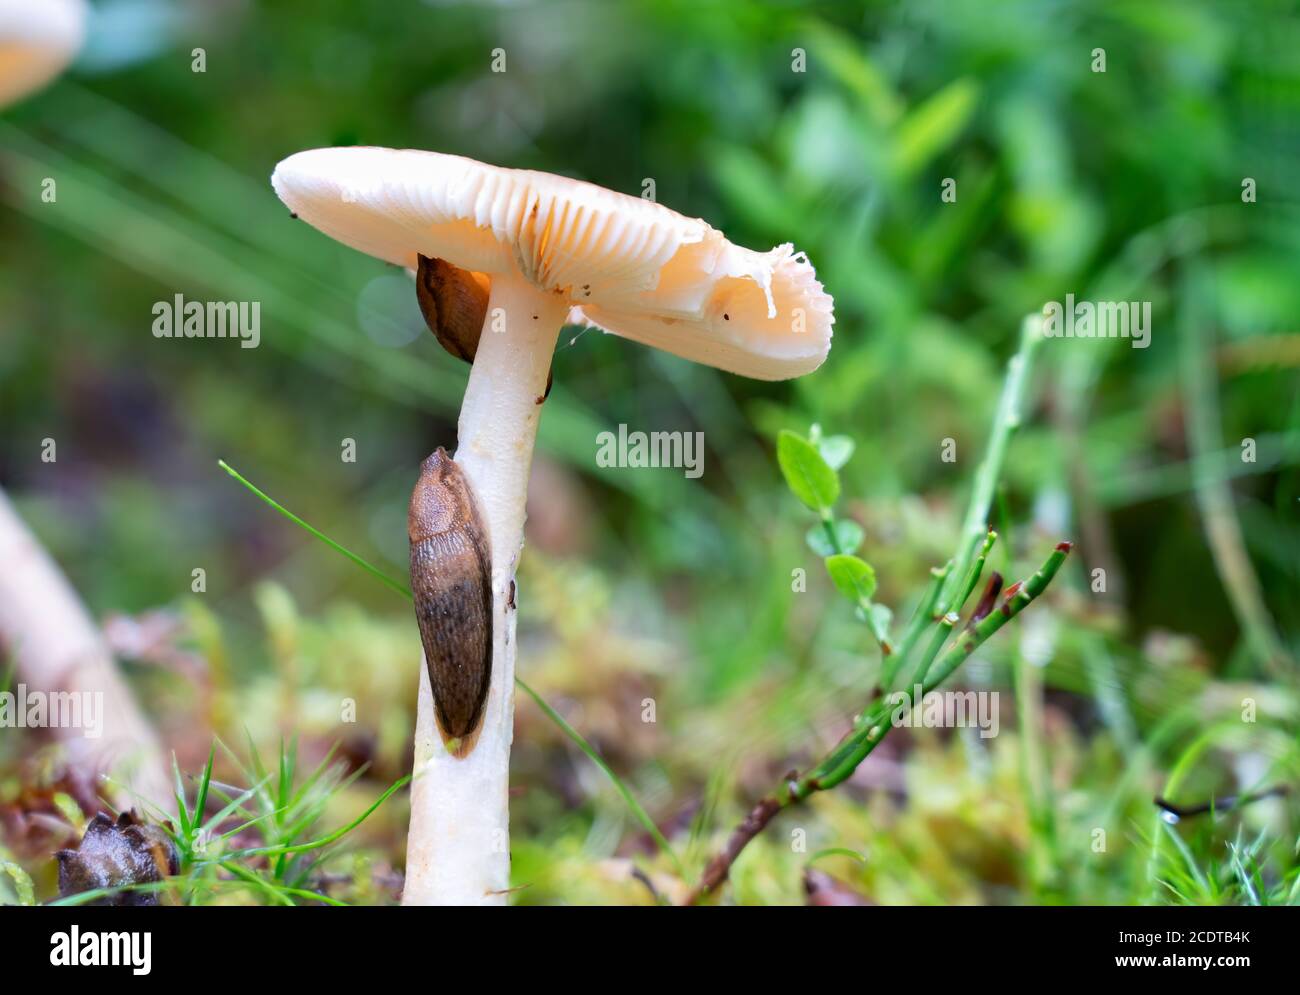 Two land slugs eating white mushroom russula, very common an edible mushroom growing out of a layer of moss and grass, close up photo Stock Photo